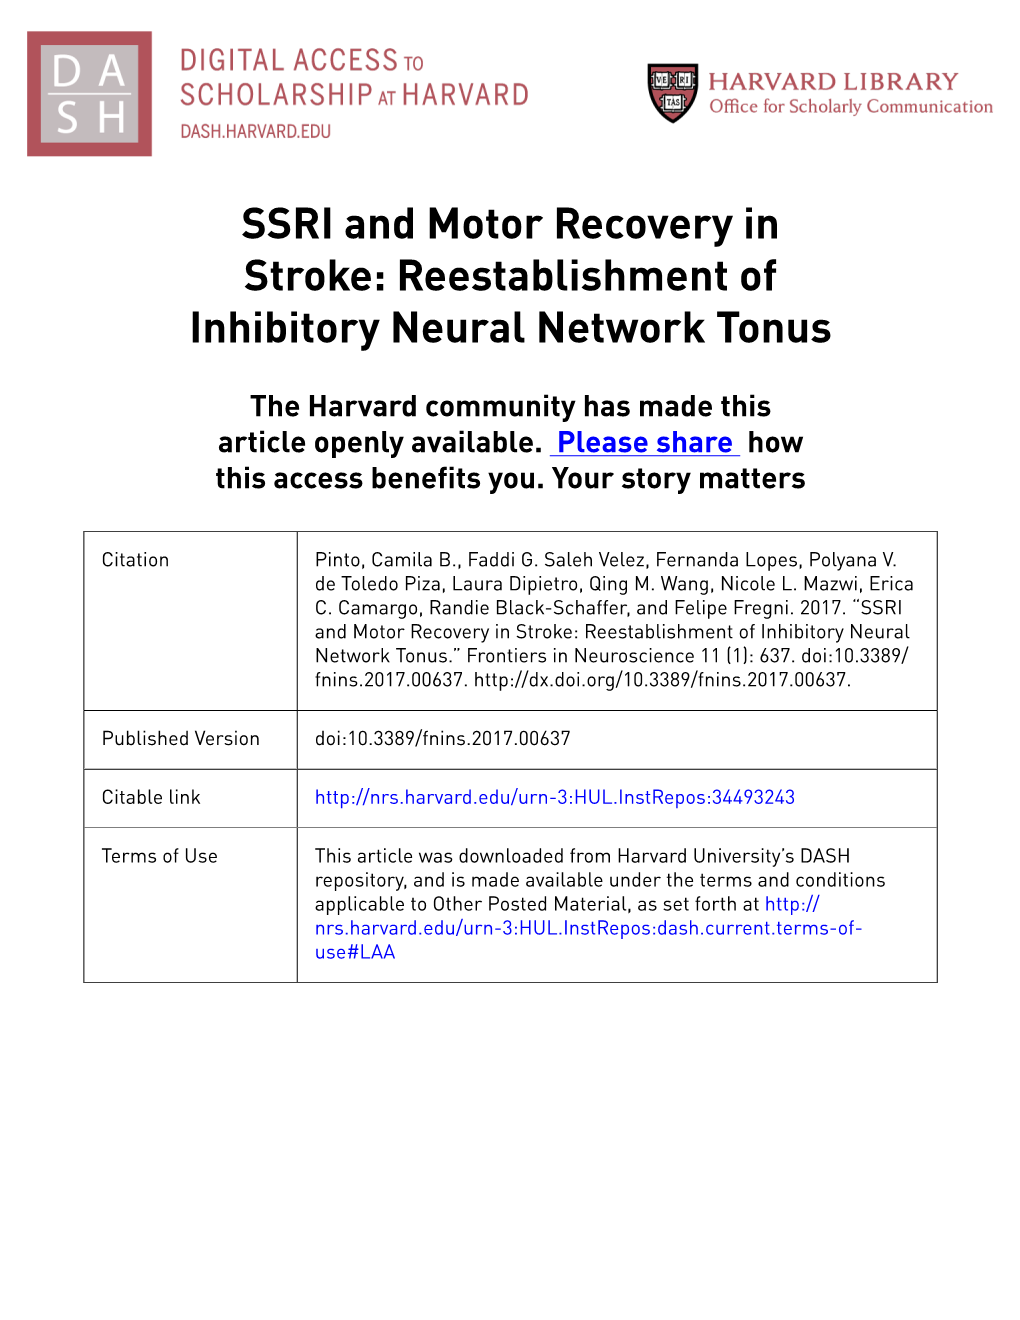 SSRI and Motor Recovery in Stroke: Reestablishment of Inhibitory Neural Network Tonus